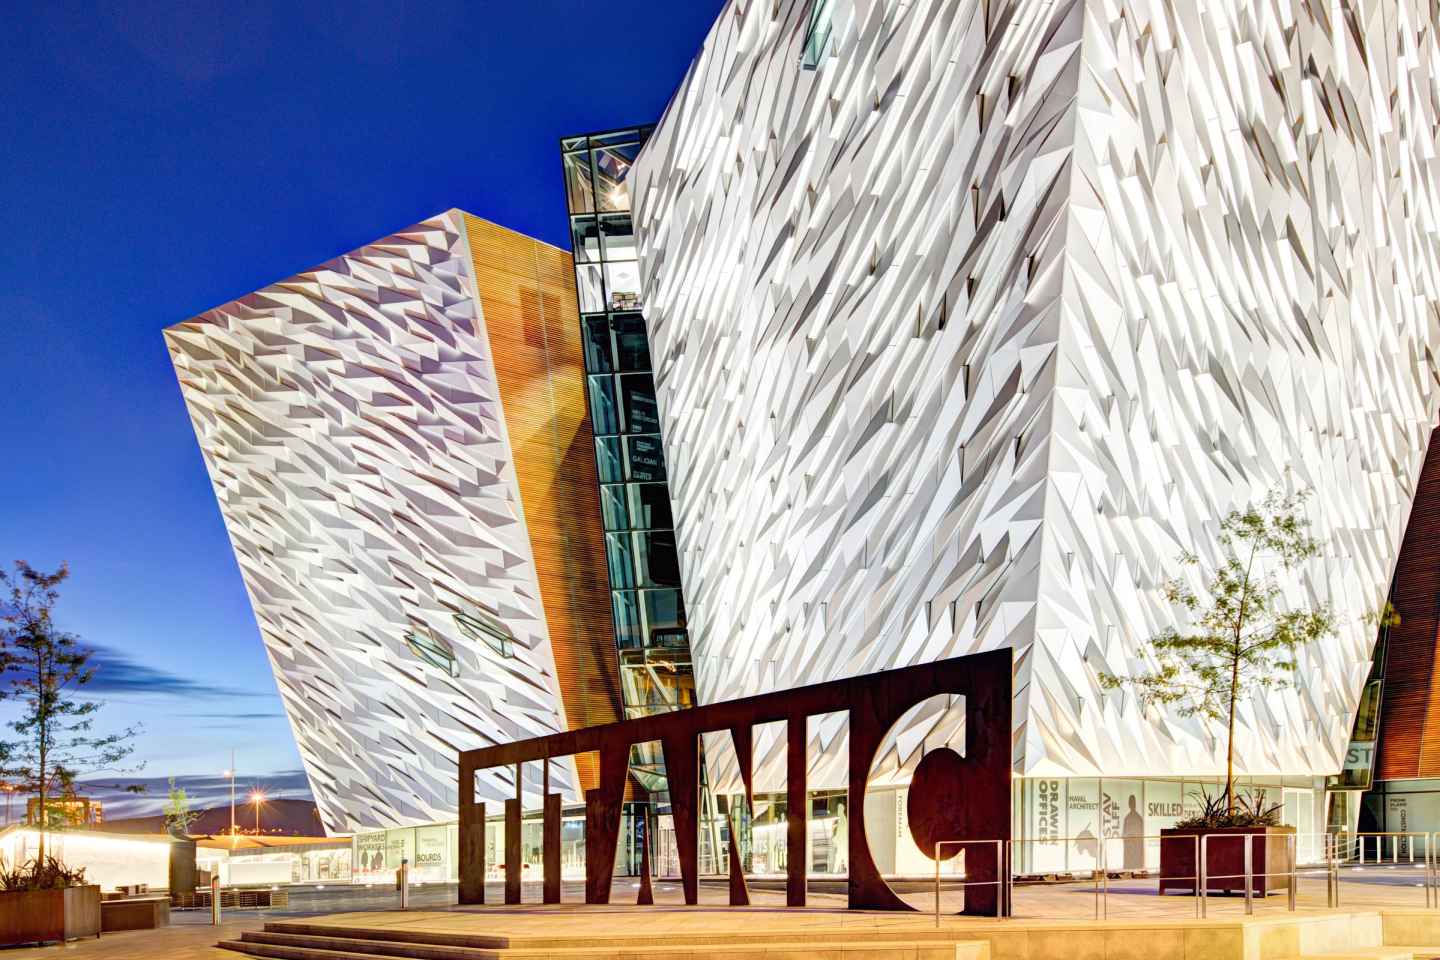 The Titanic Experience with SS Nomadic Visit